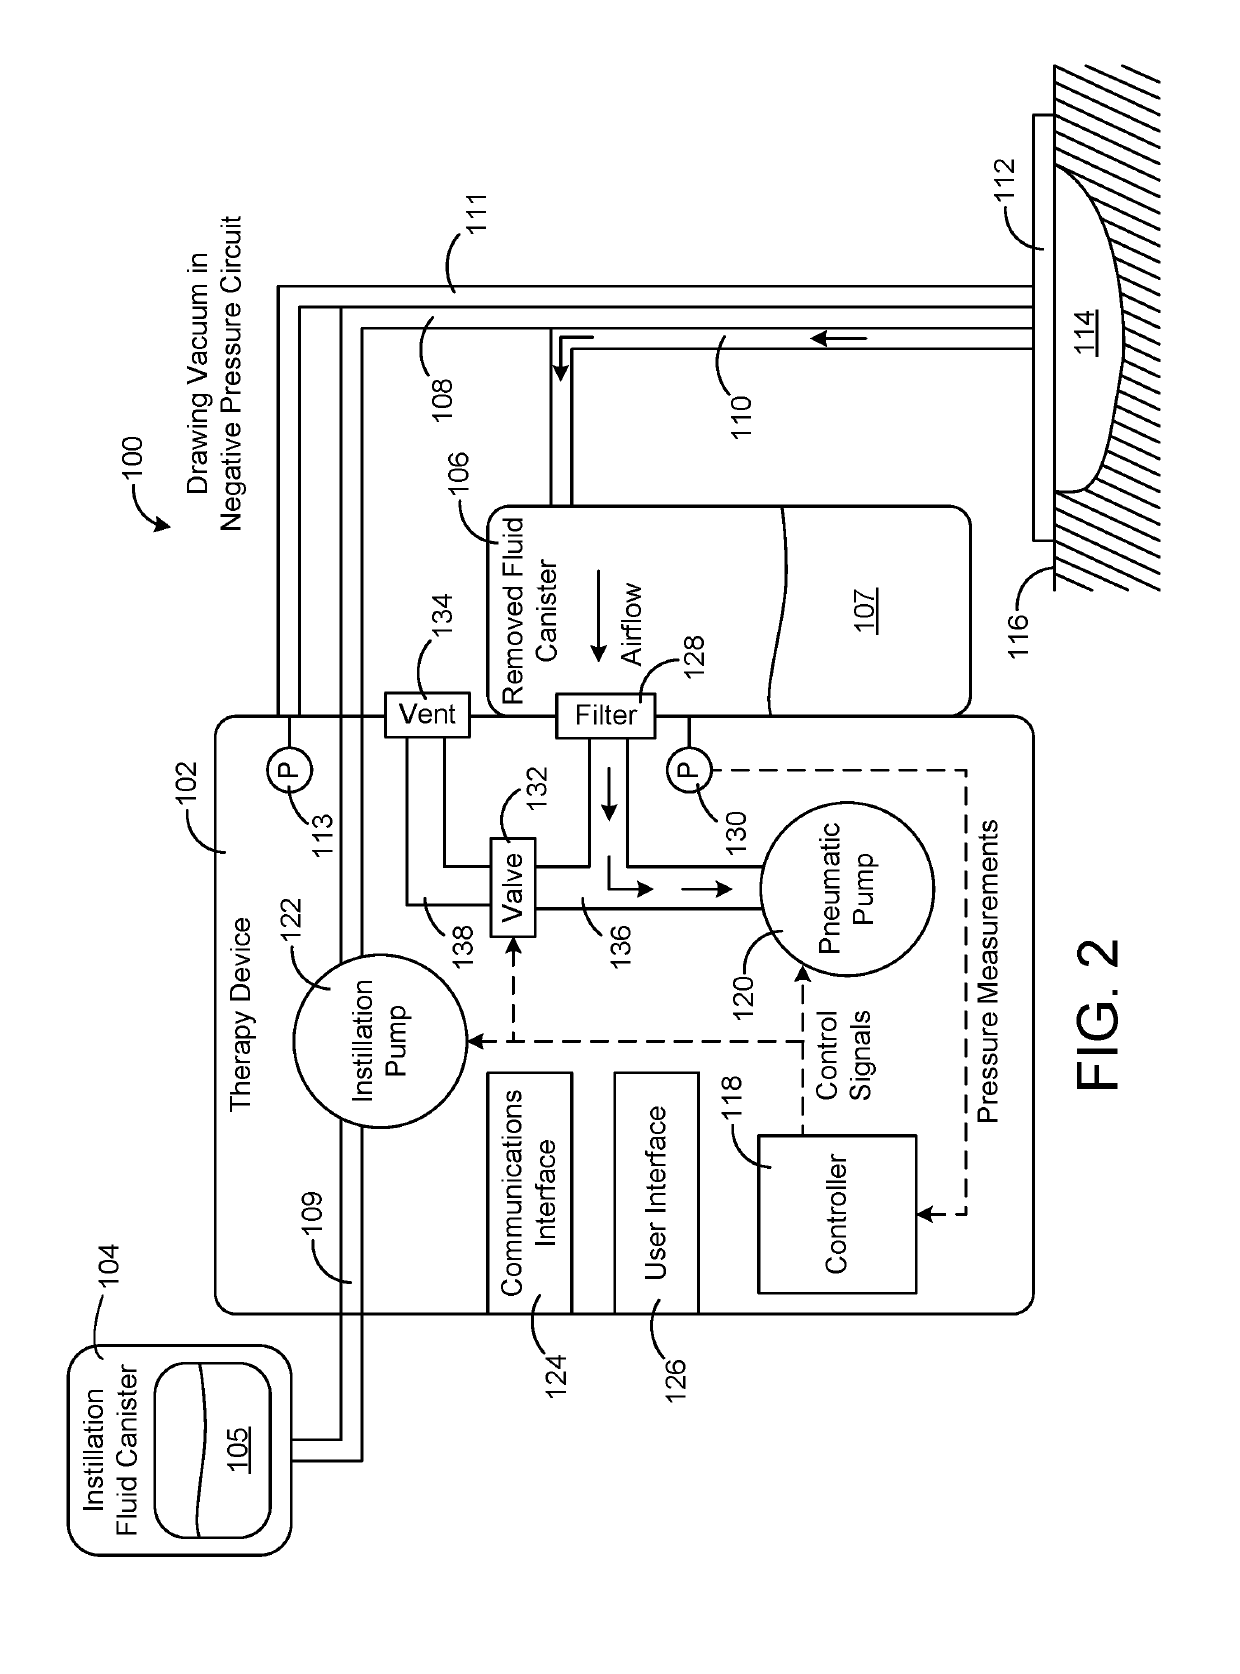 Wound therapy system with wound volume estimation